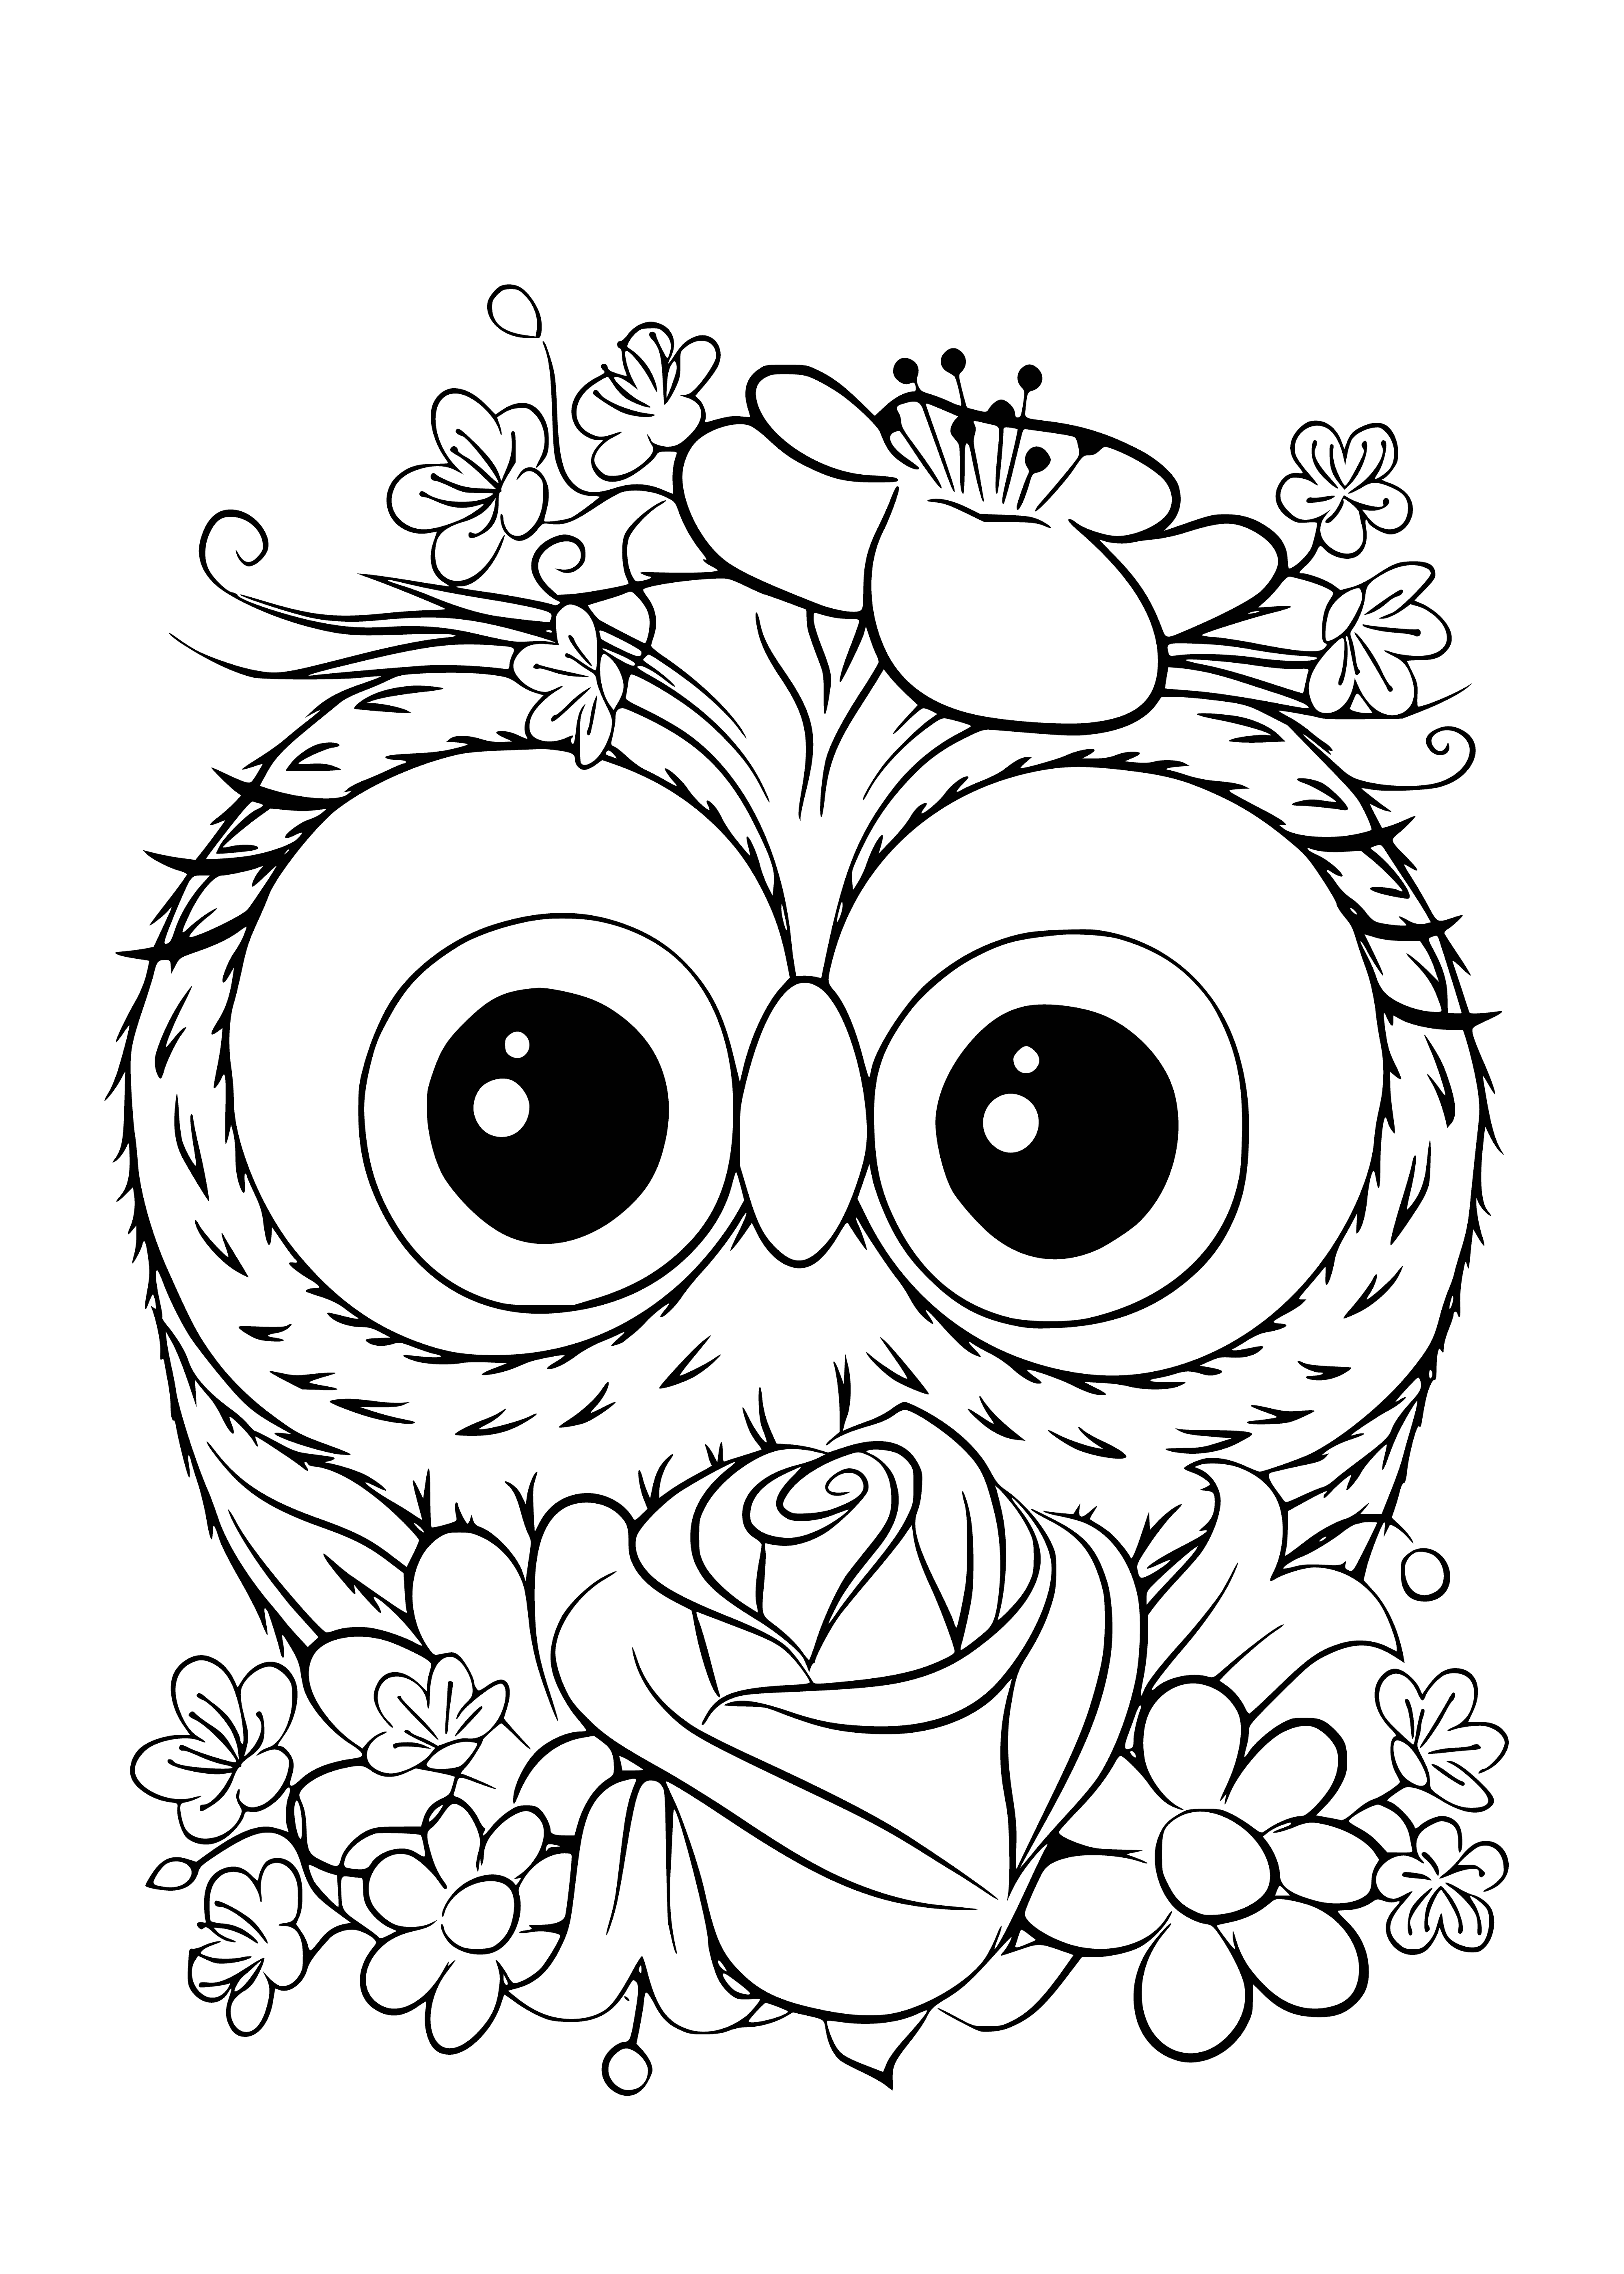 coloring page: A big-eyed, bow-wearing owl gliding through a starry night.